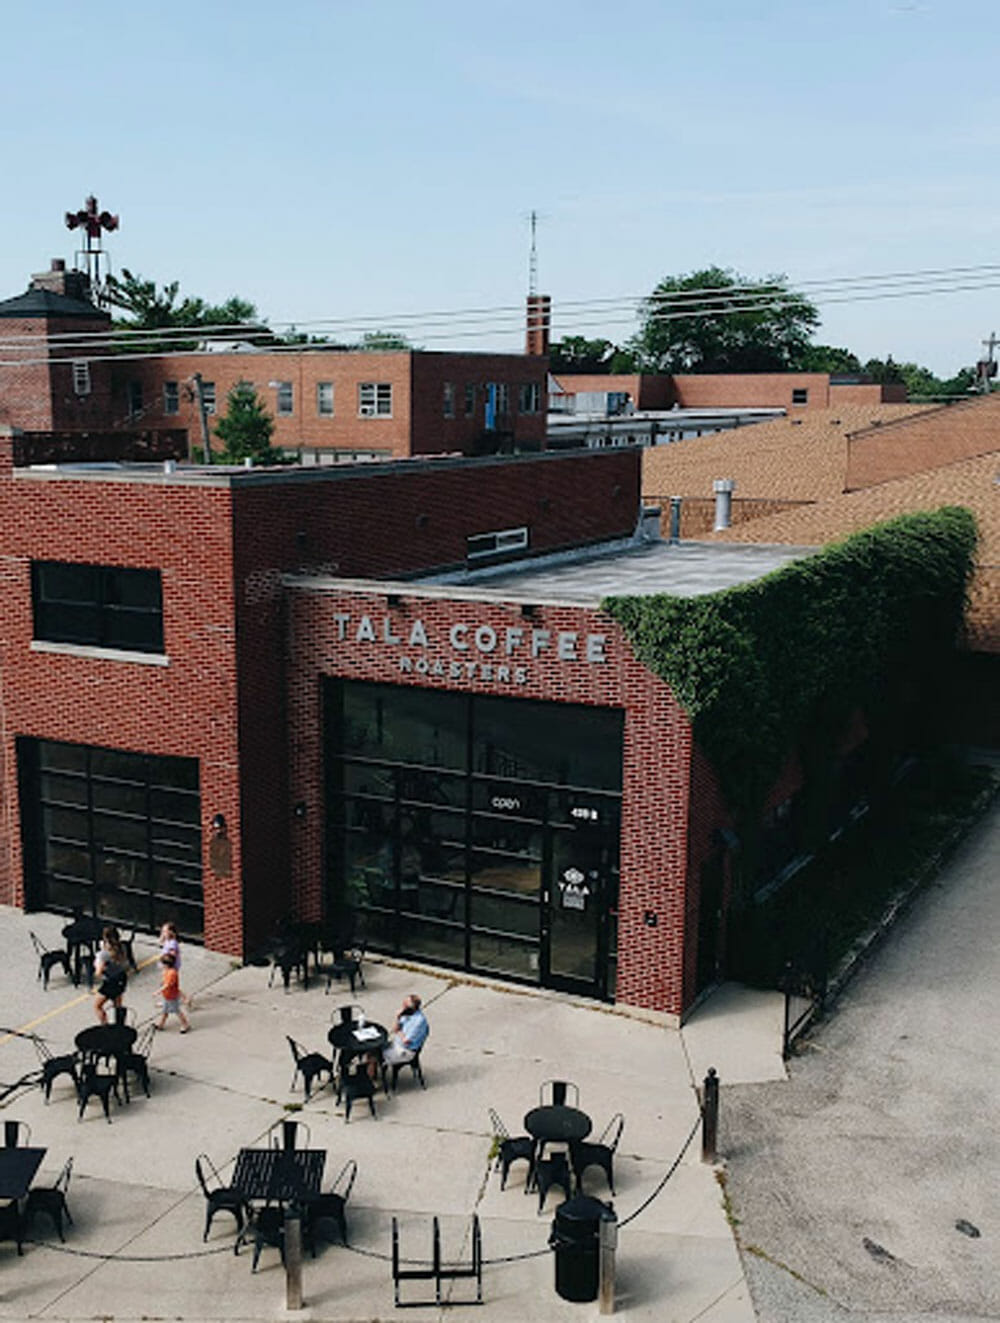 An aerial view of a cafe located inside of a large brick building with black patio tables and chairs outside.